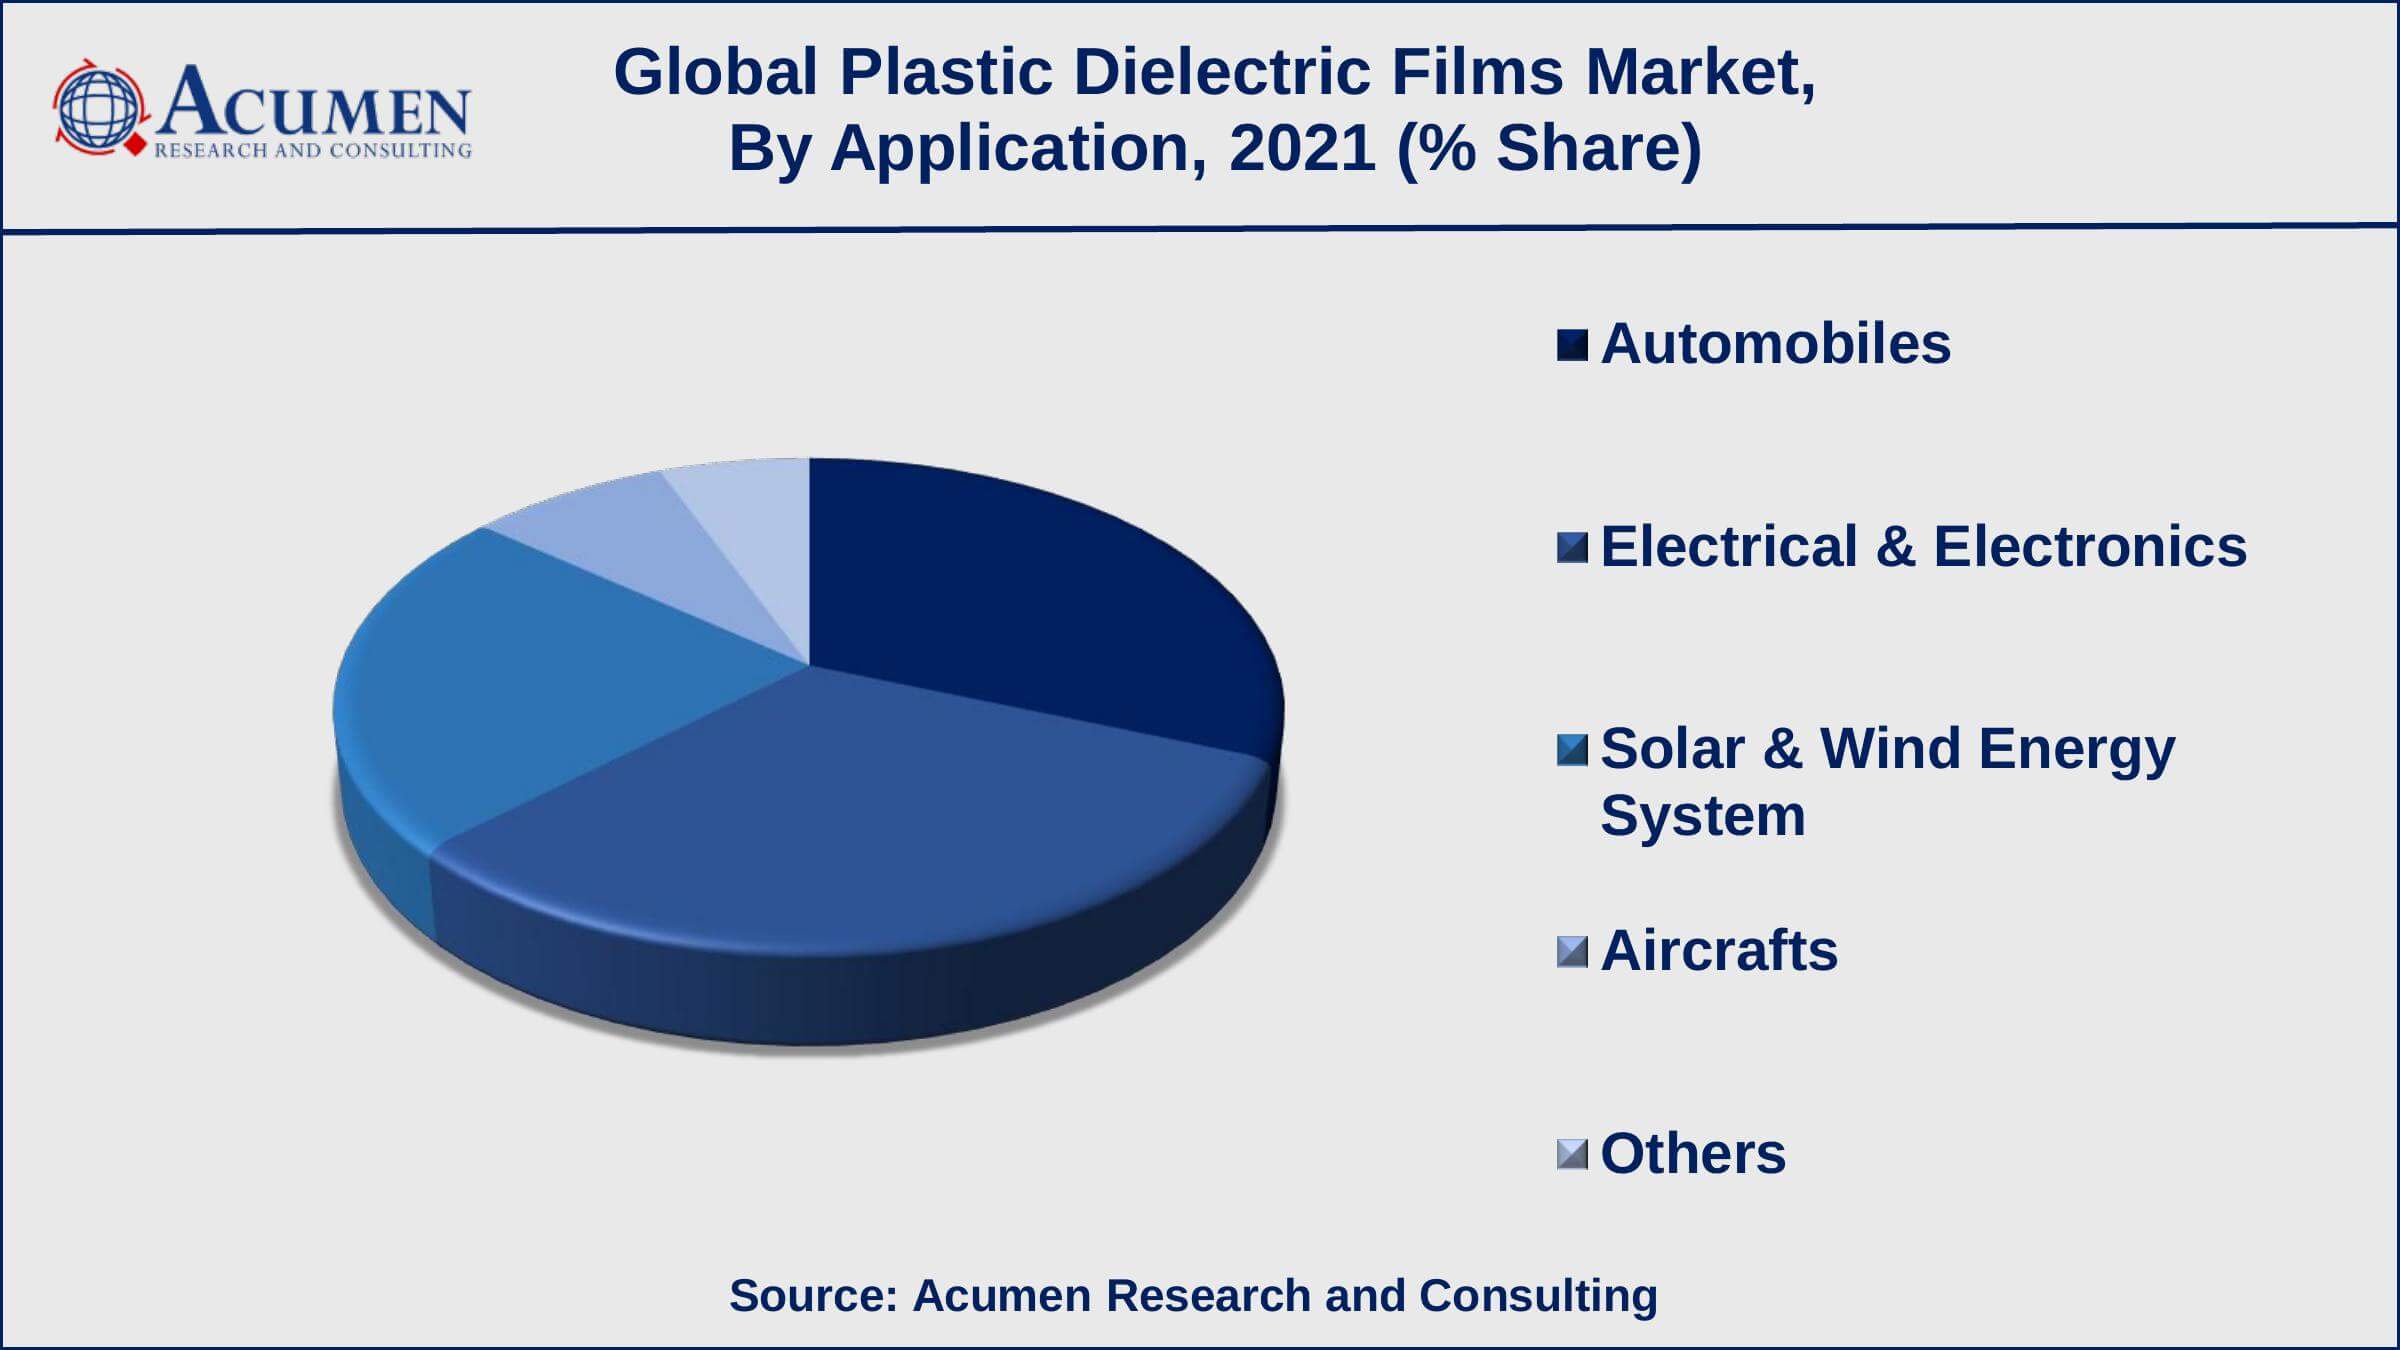 Among application, electrical & electronics sub-segment accounted for USD 358.4 million in 2021